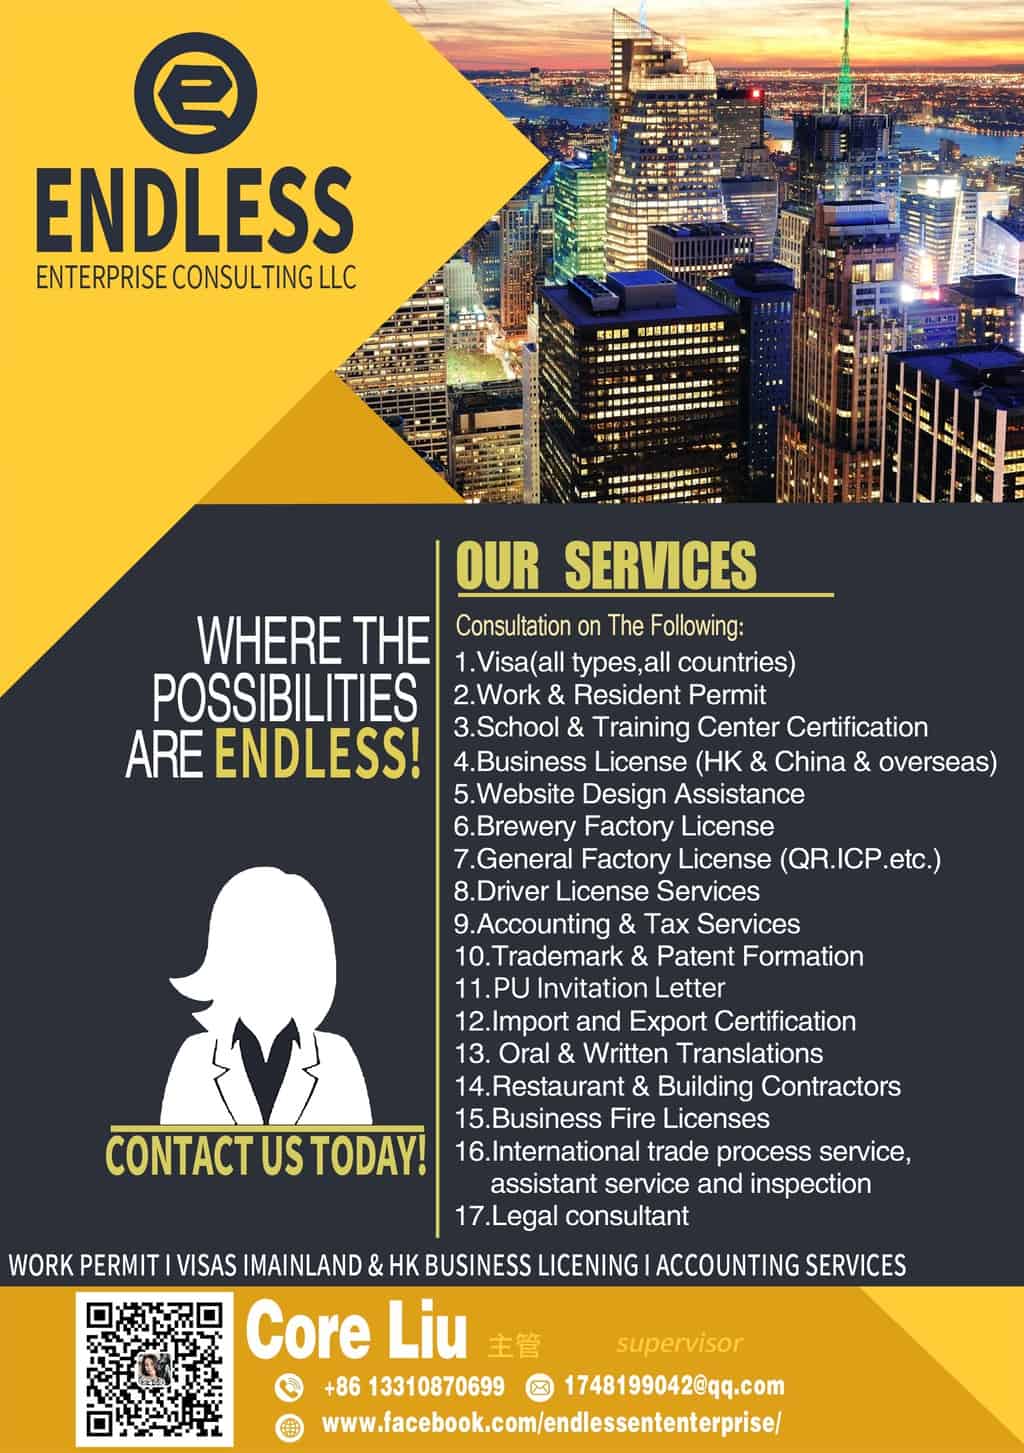 Featured image for “Endless Enterprise Consulting Services”